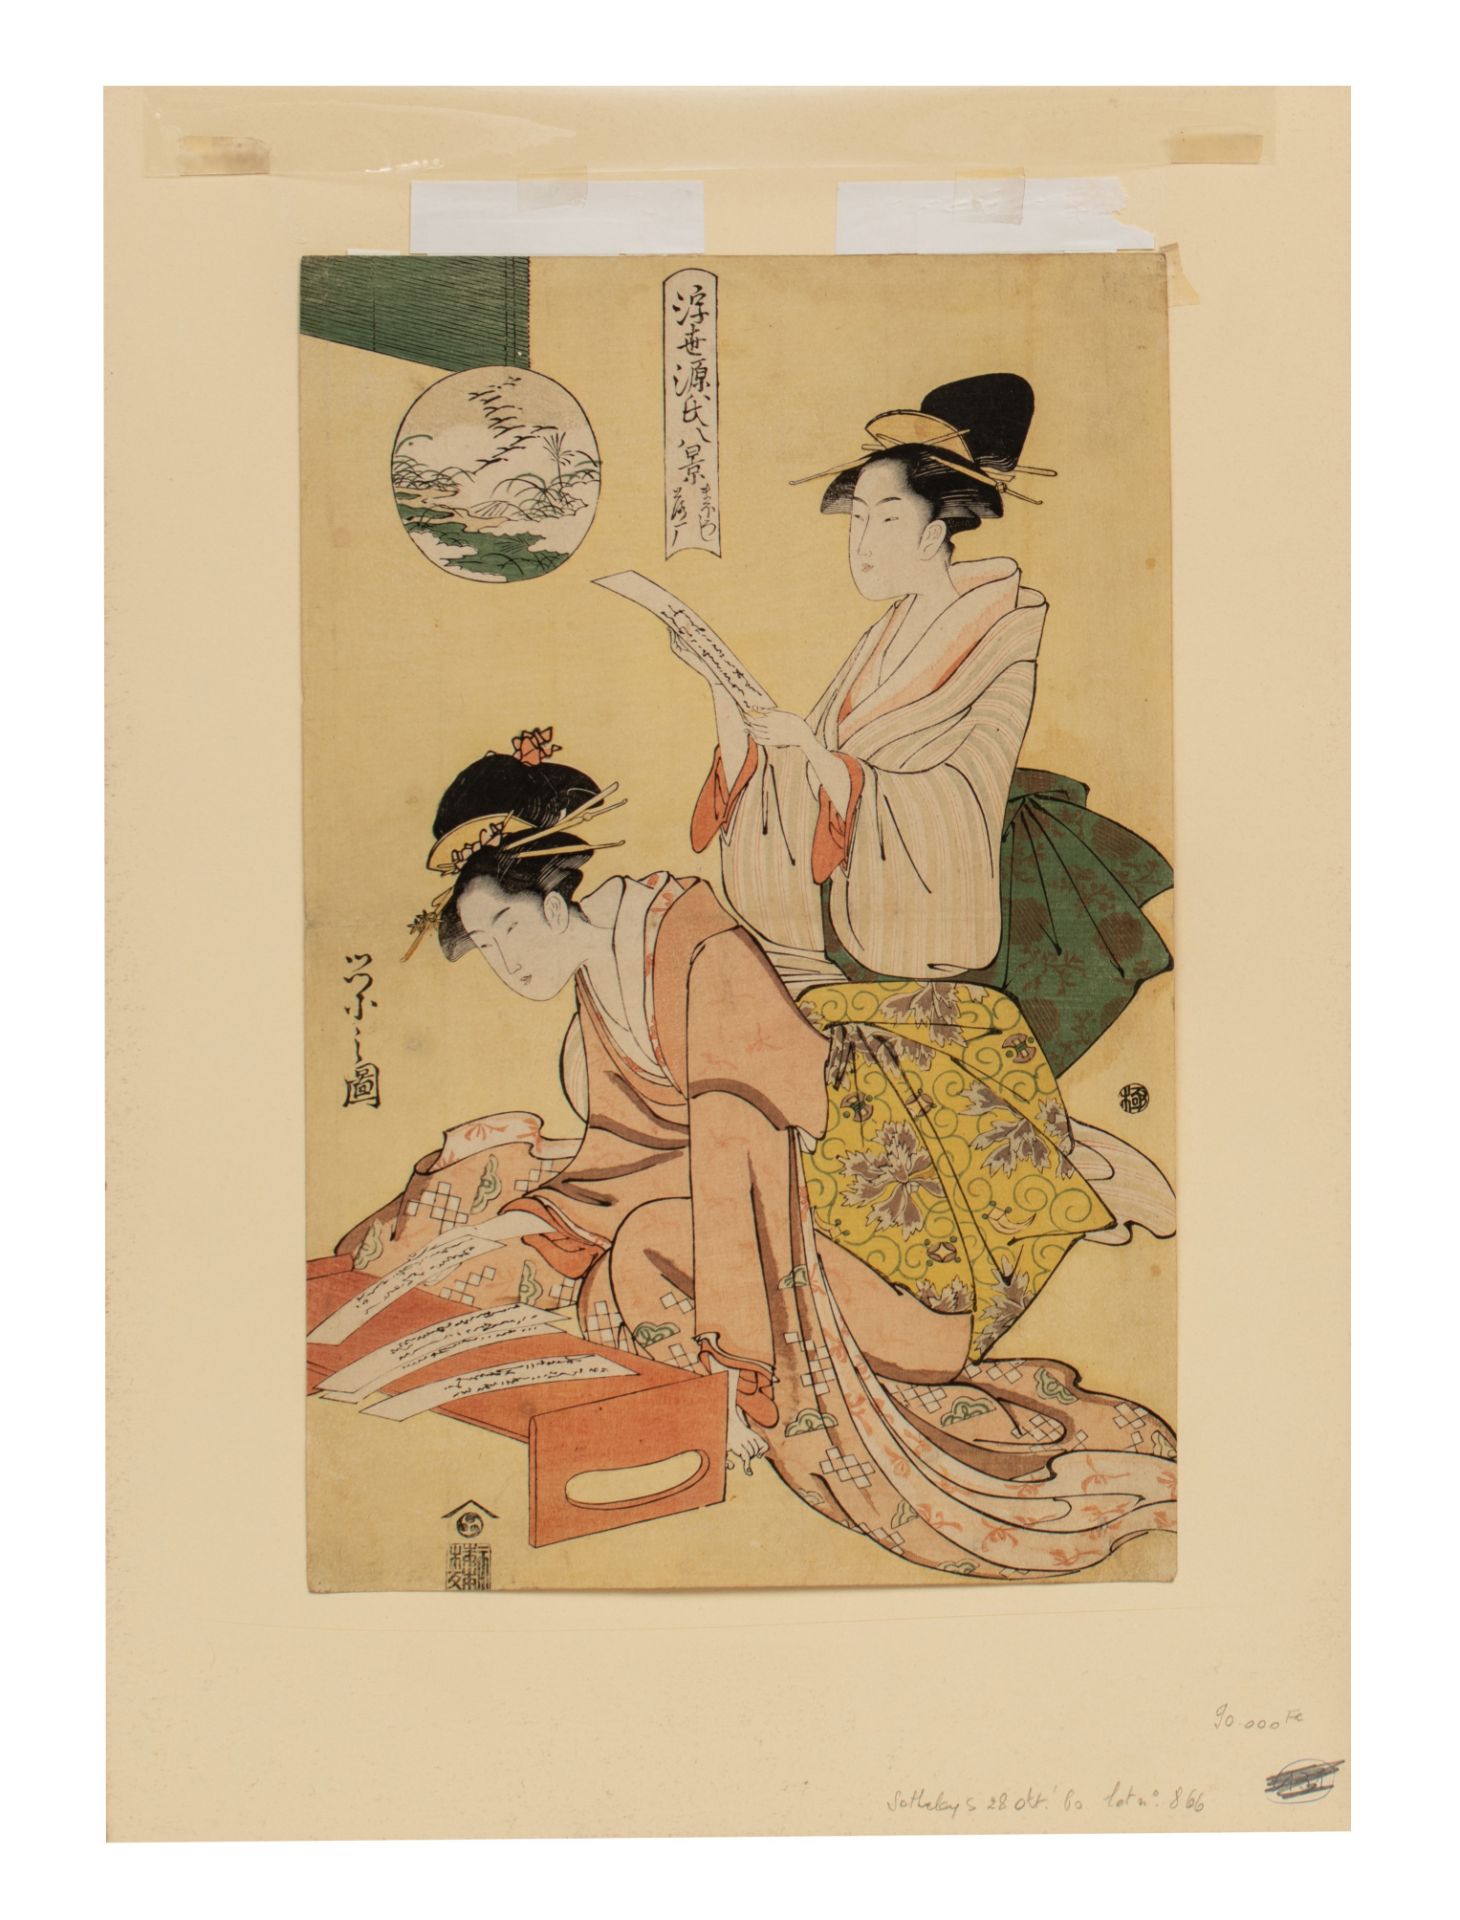 A Japanese woodblock print by Eishi, of courtesans looking at letters, ca. 1796 - Image 3 of 4